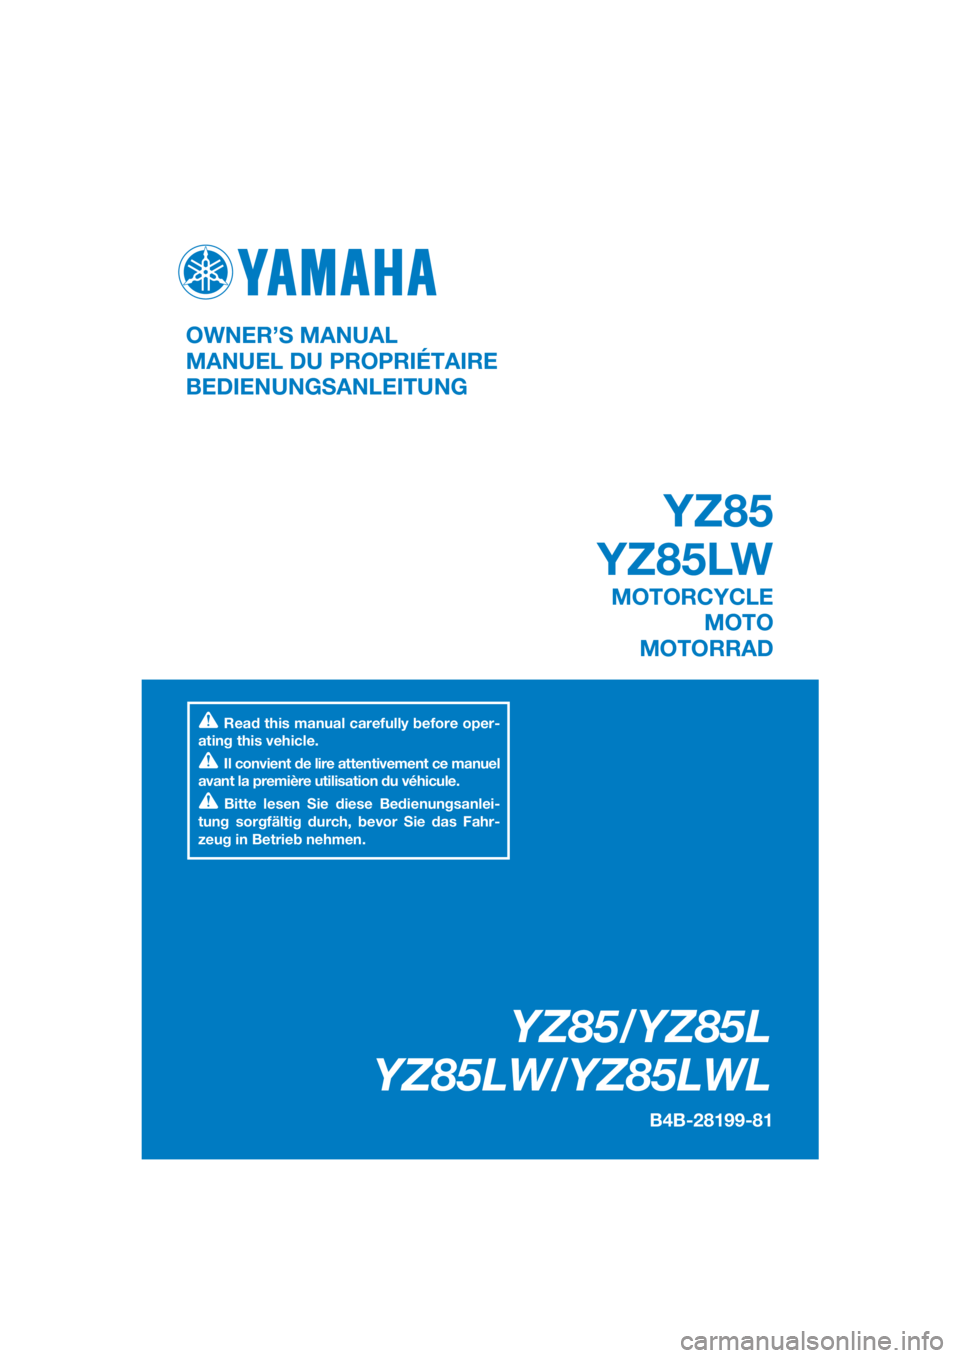 YAMAHA YZ85 2020  Notices Demploi (in French) DIC183
YZ85/YZ85L
YZ85LW/YZ85LWL
B4B-28199-81
OWNER’S MANUAL
MANUEL DU PROPRIÉTAIRE
BEDIENUNGSANLEITUNG
Read this manual carefully before oper-
ating this vehicle.
Il convient de lire attentivement